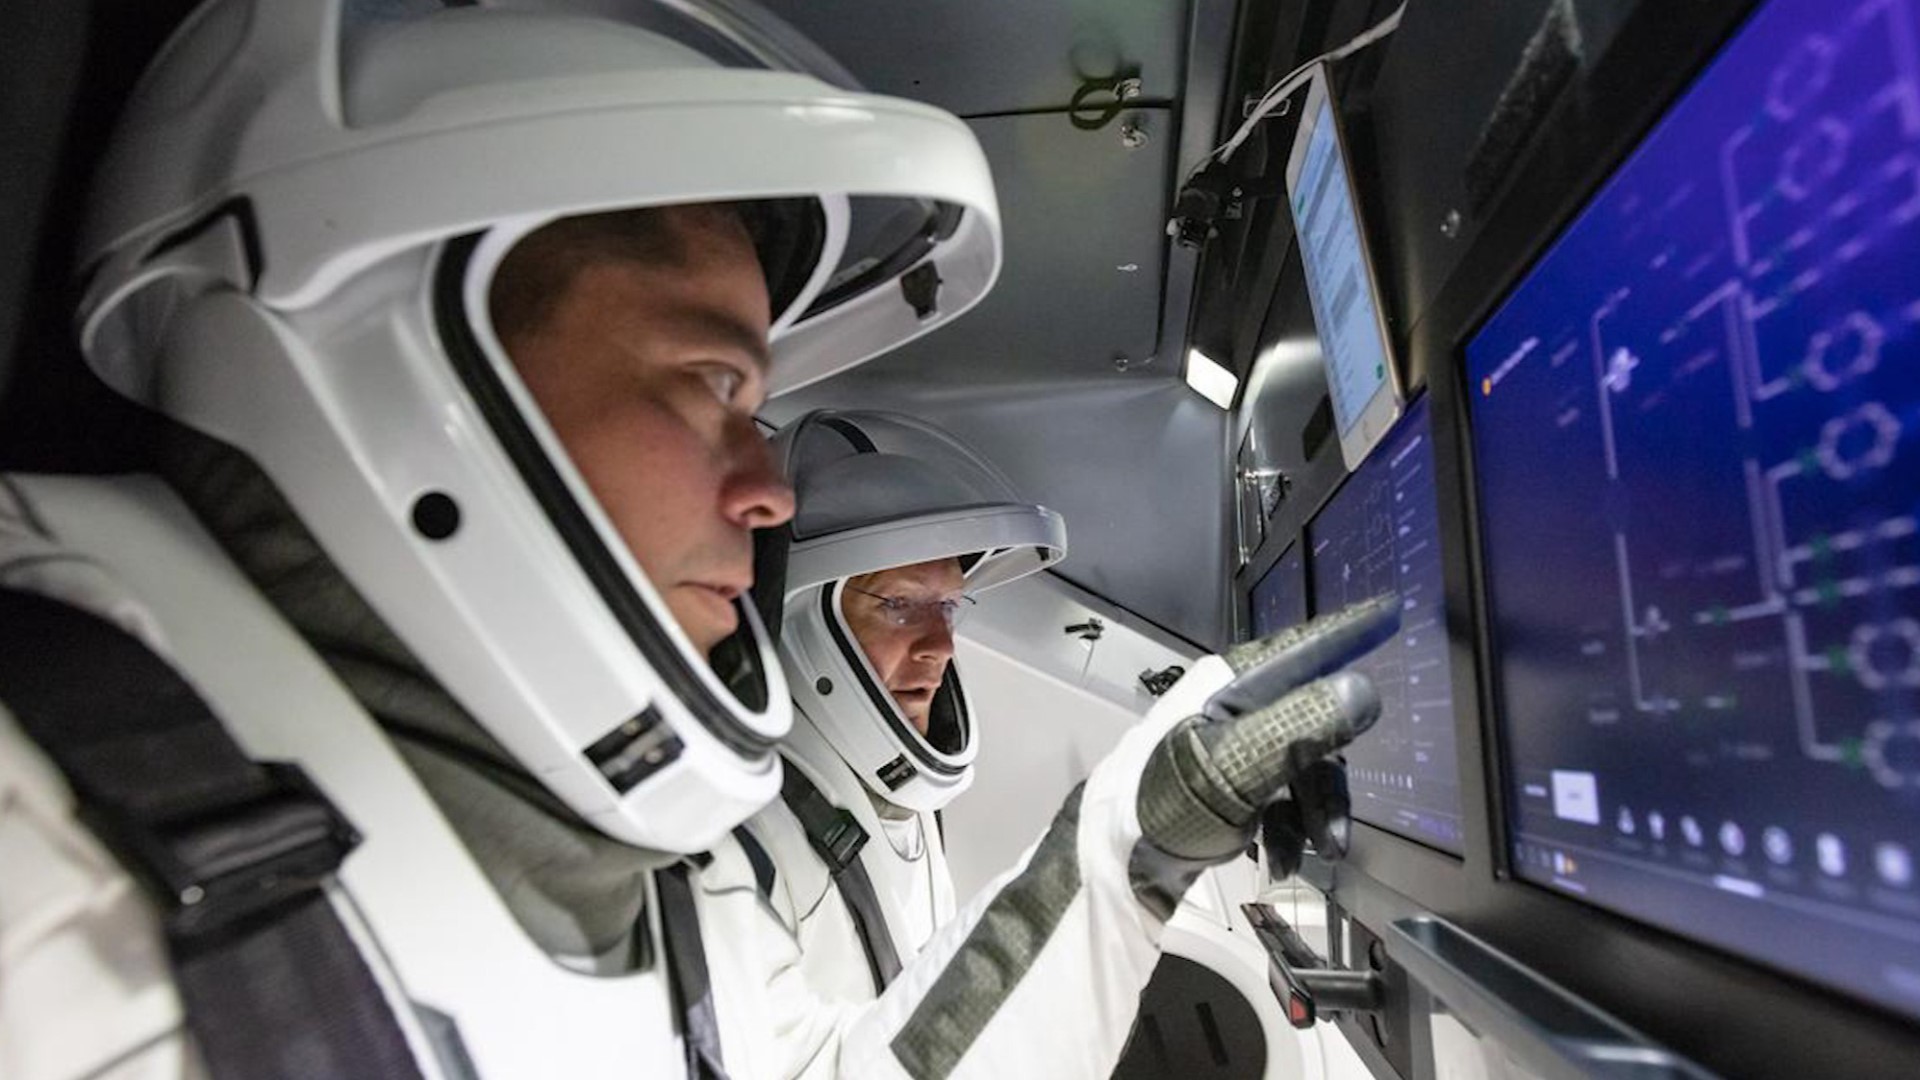 A SpaceX official says the first crewed mission from U.S. soil since 2011 may be postponed if the skies aren't clear and Atlantic ocean calm from Florida to Ireland on launch day, noting it wouldn't be unusual for this time of year.